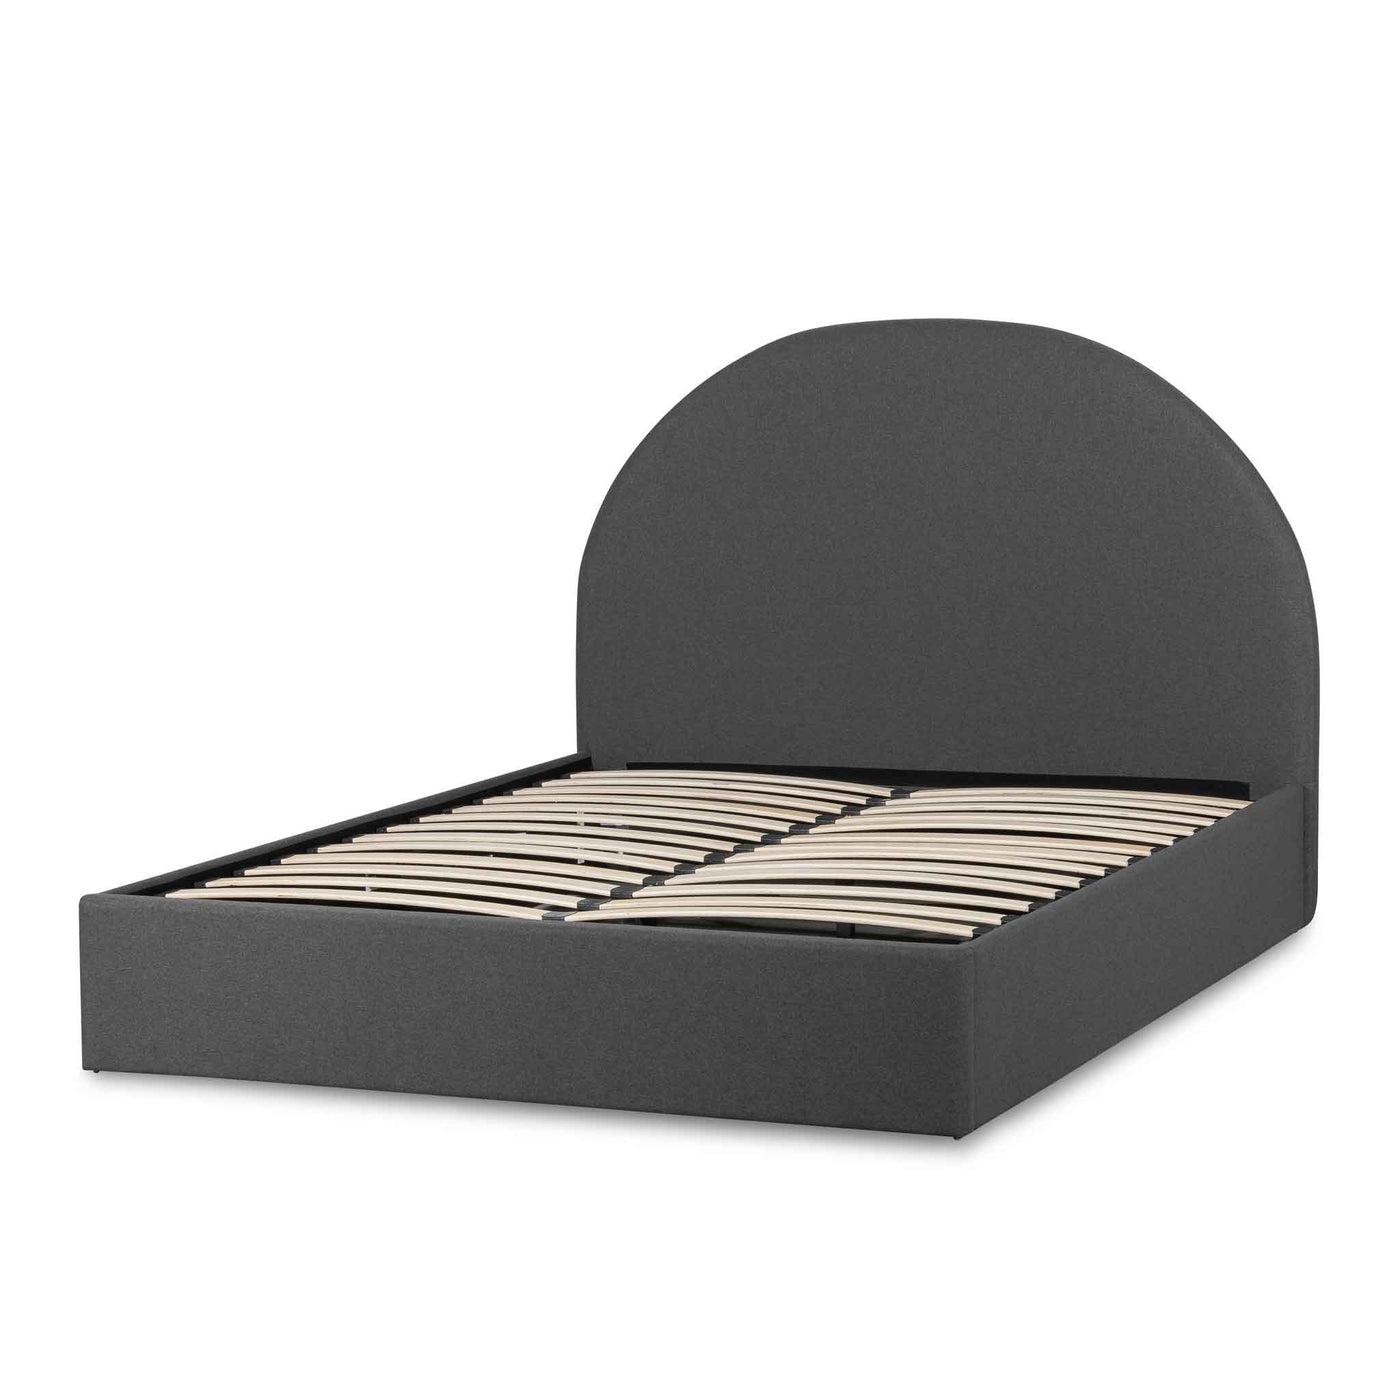 Fabric King Bed - Fossil Grey with Storage